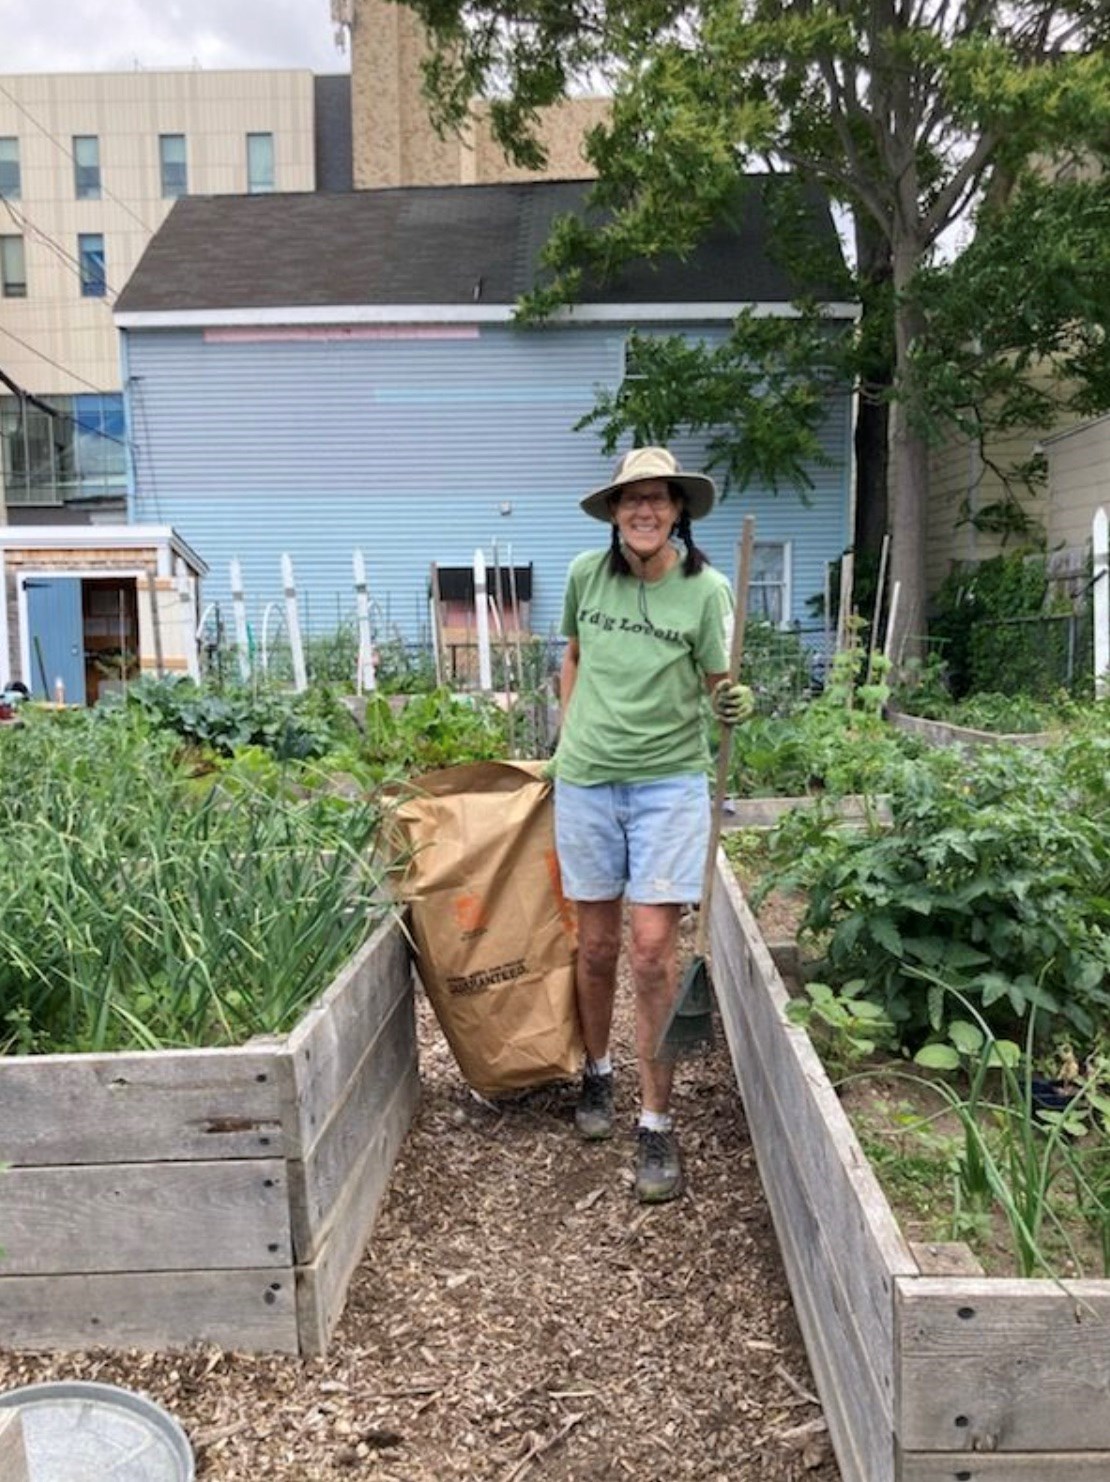 Image of woman standing in garden with rake and compost bag. The garden has several raised garden beds made from wood structures. 